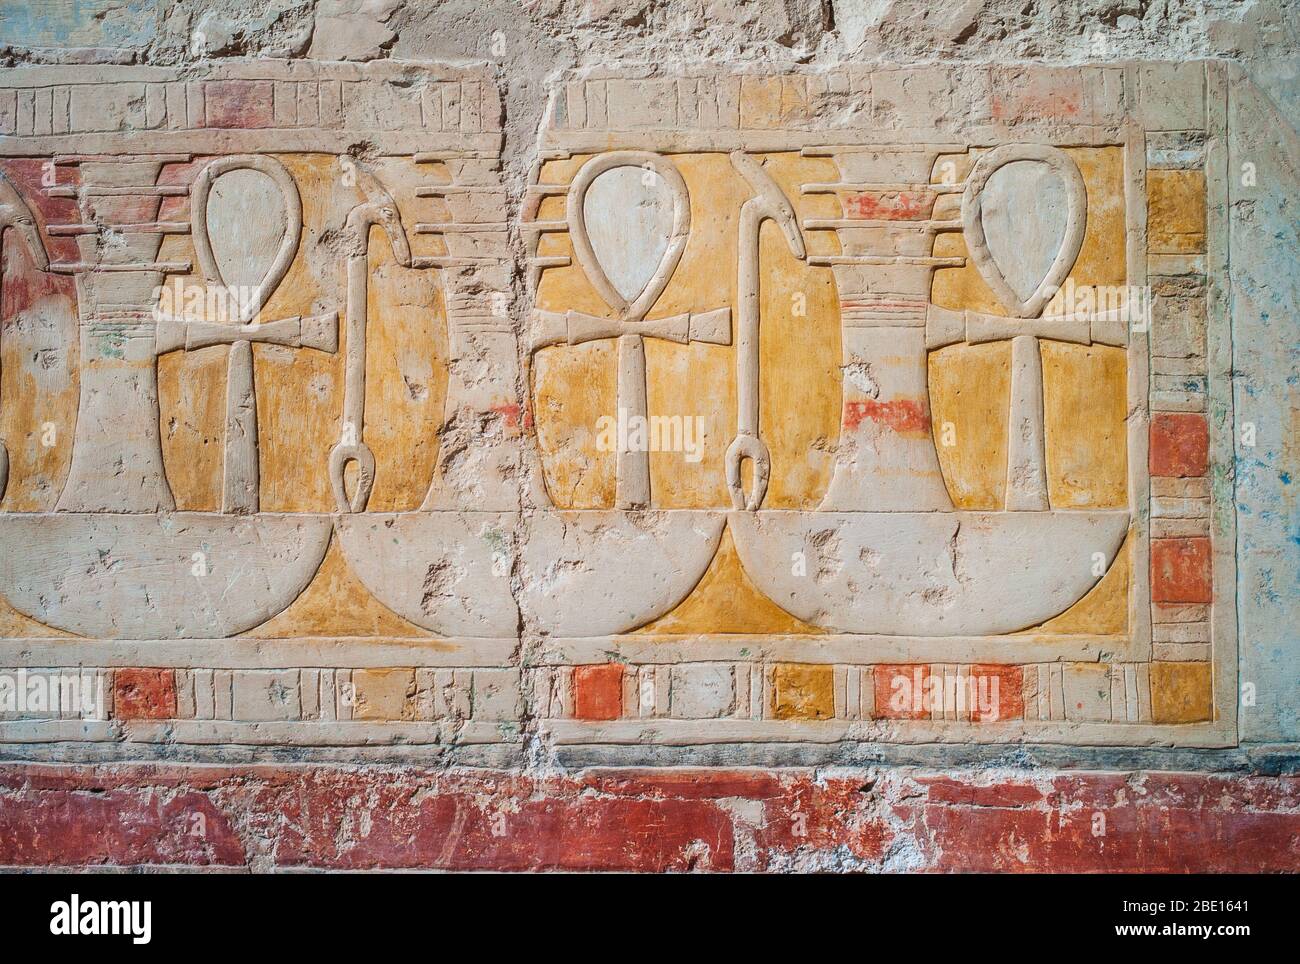 Ankh, Sign of Life, Djed, Pillar, and Was, Dominion, Hieroglyphs in the Temple of Hatshepsut in Deir El-Bahari, Egypt, an Ancient Bas Relief Fresco Stock Photo